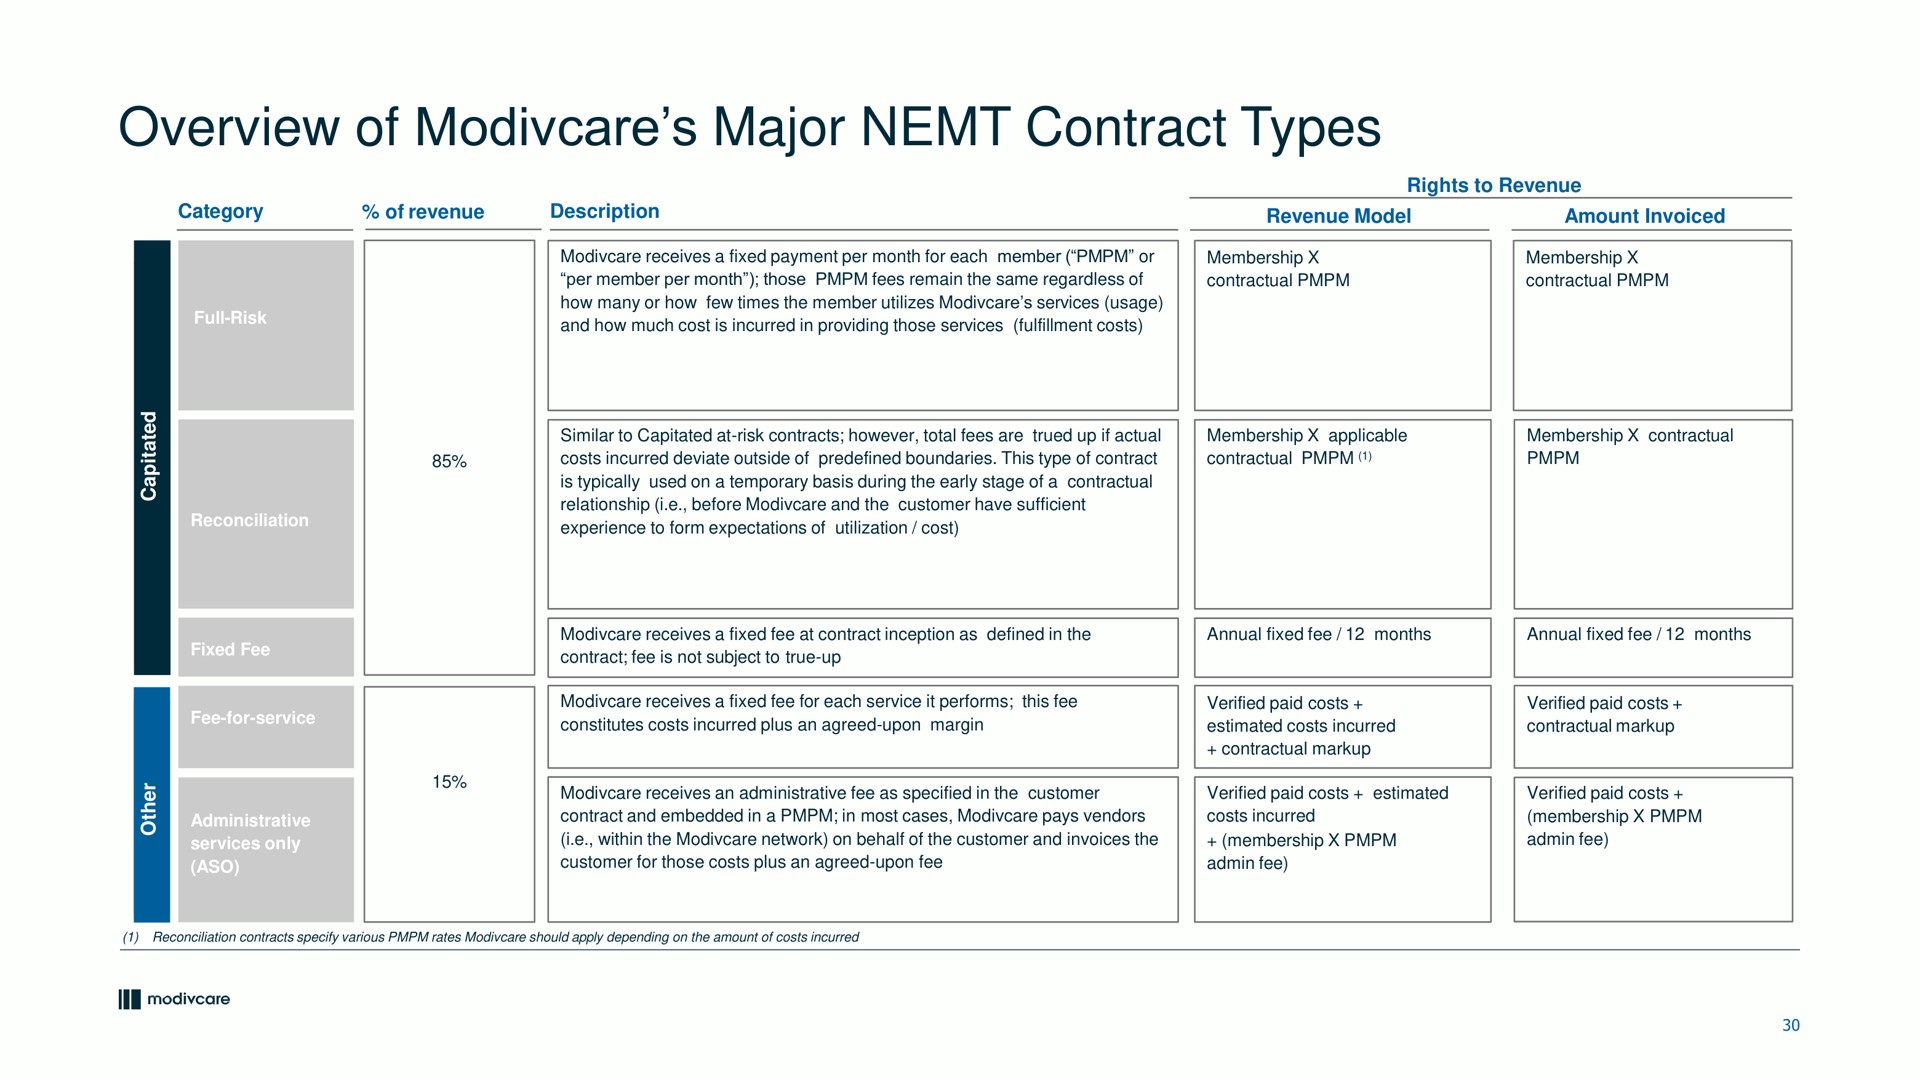 overview of major contract types | ModivCare